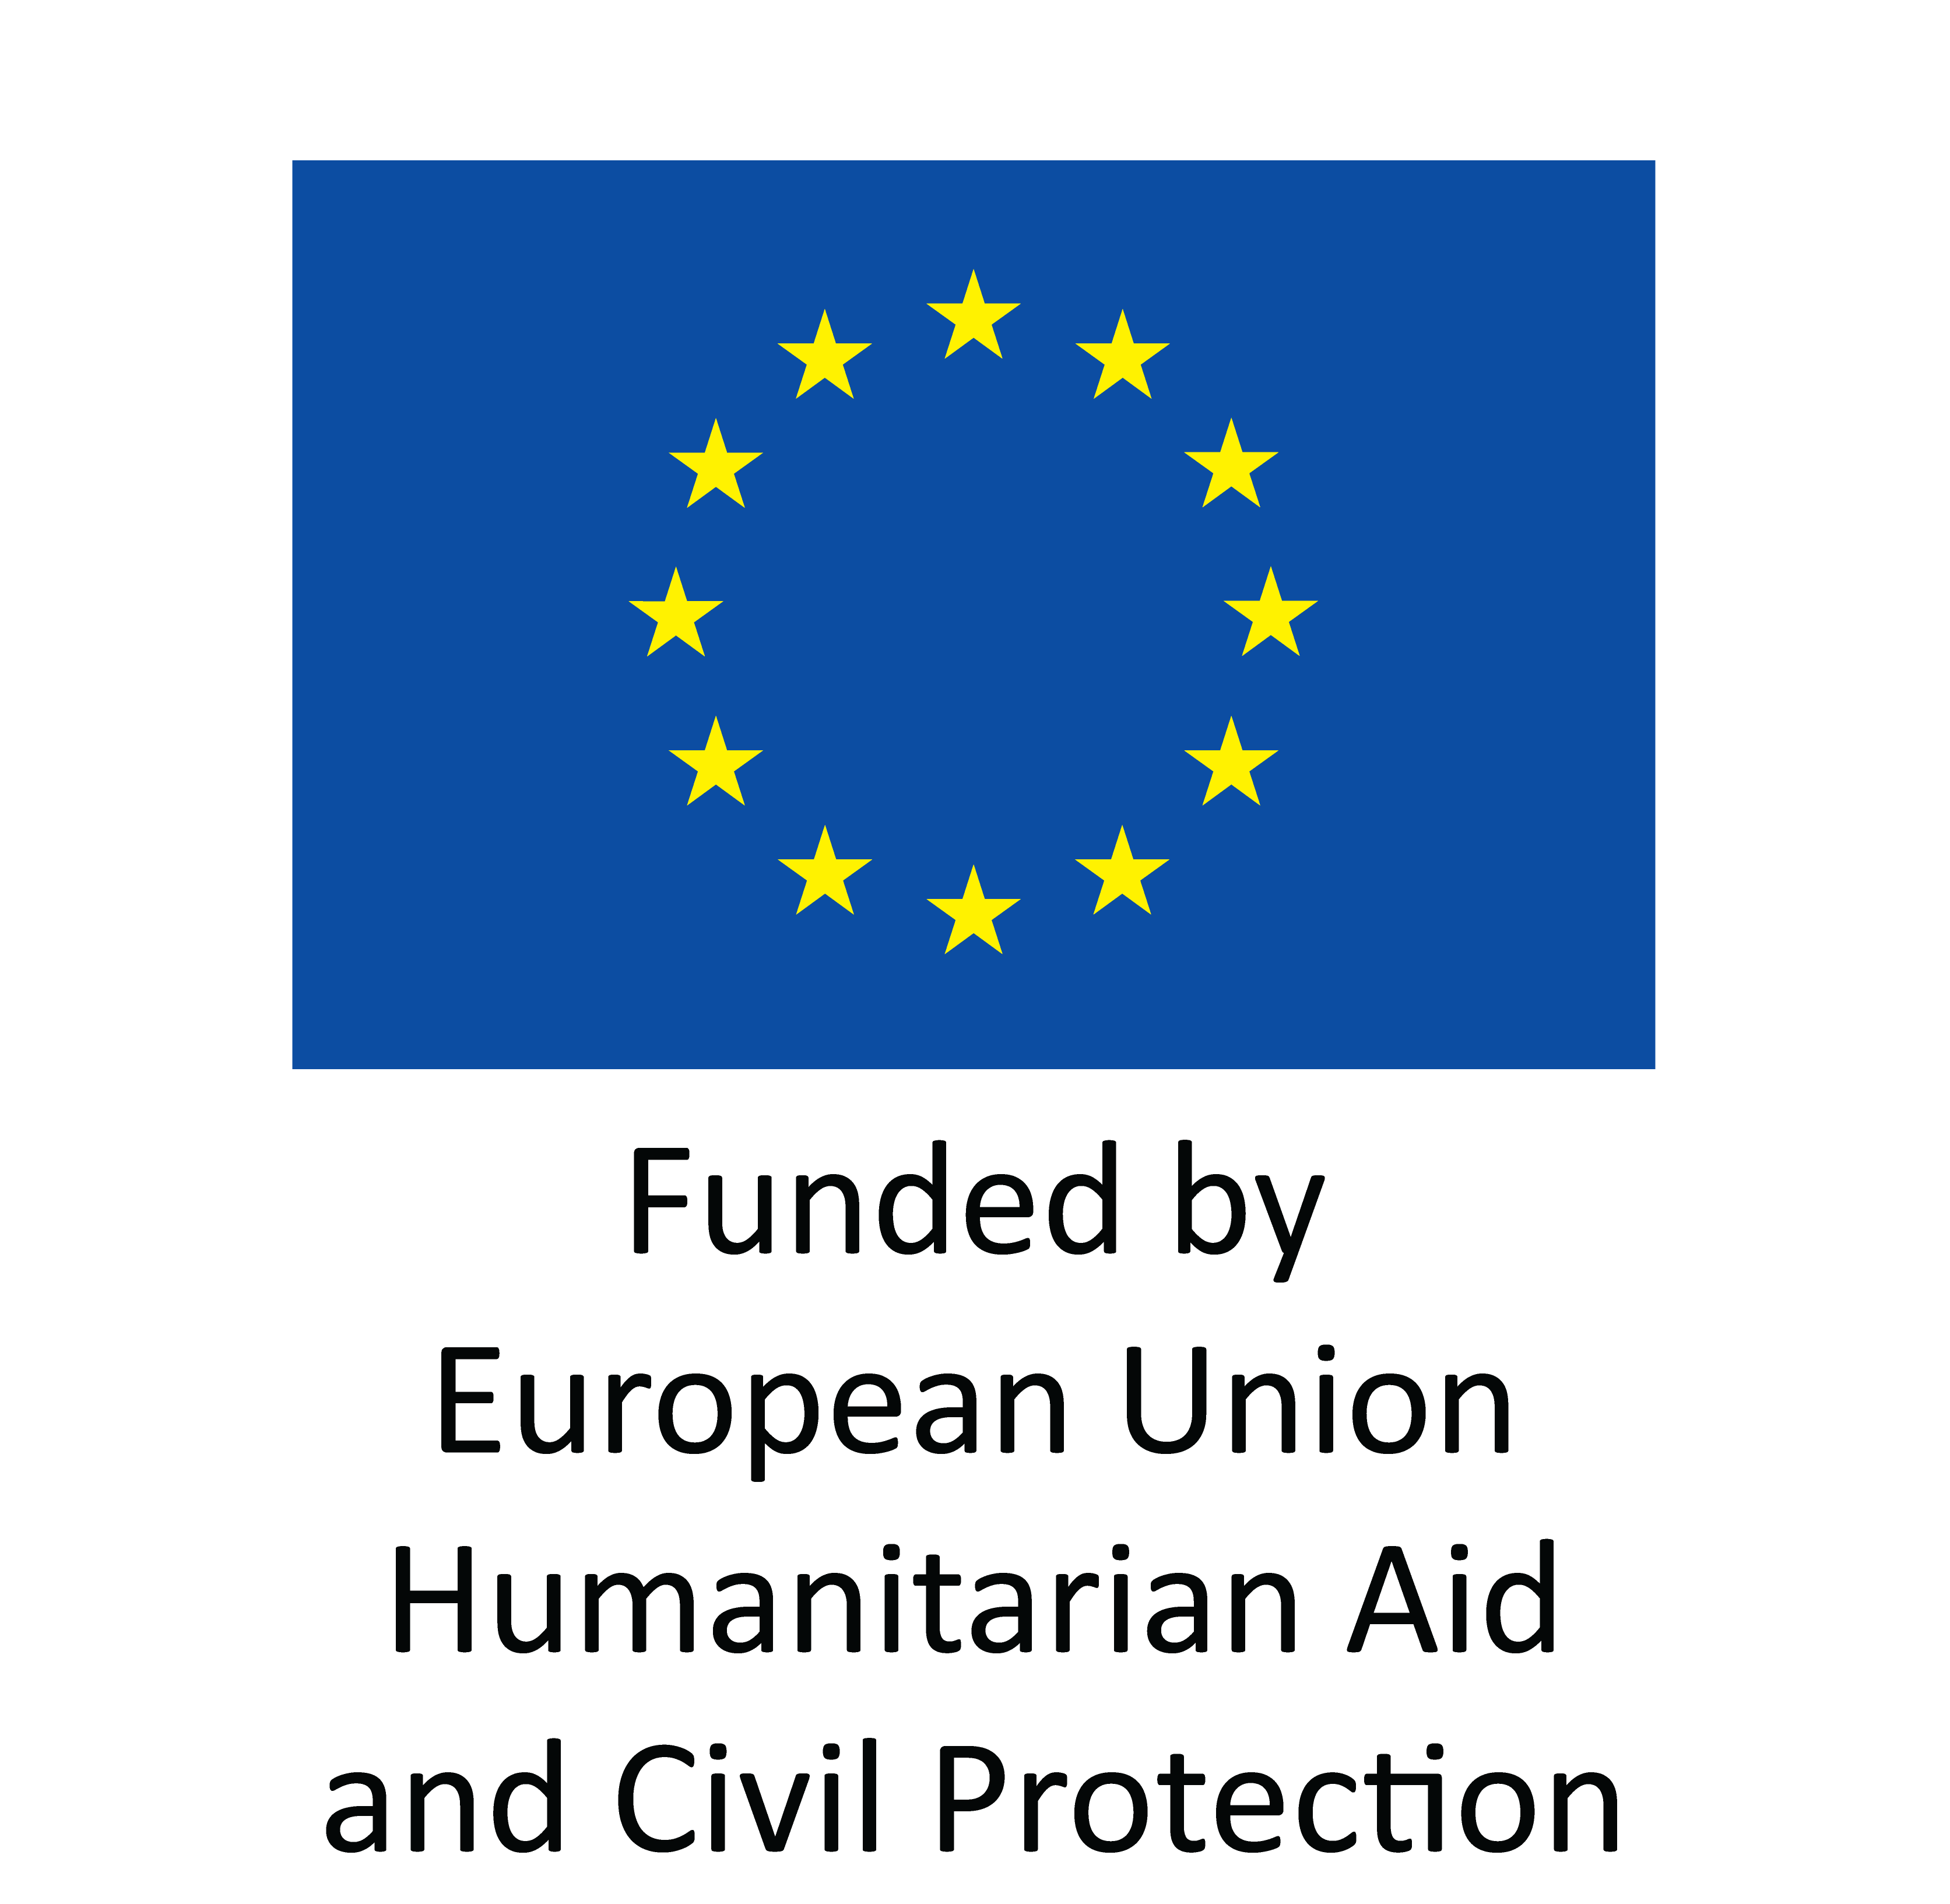 Funded by European Union Humanitarian Aid and Civil Protection